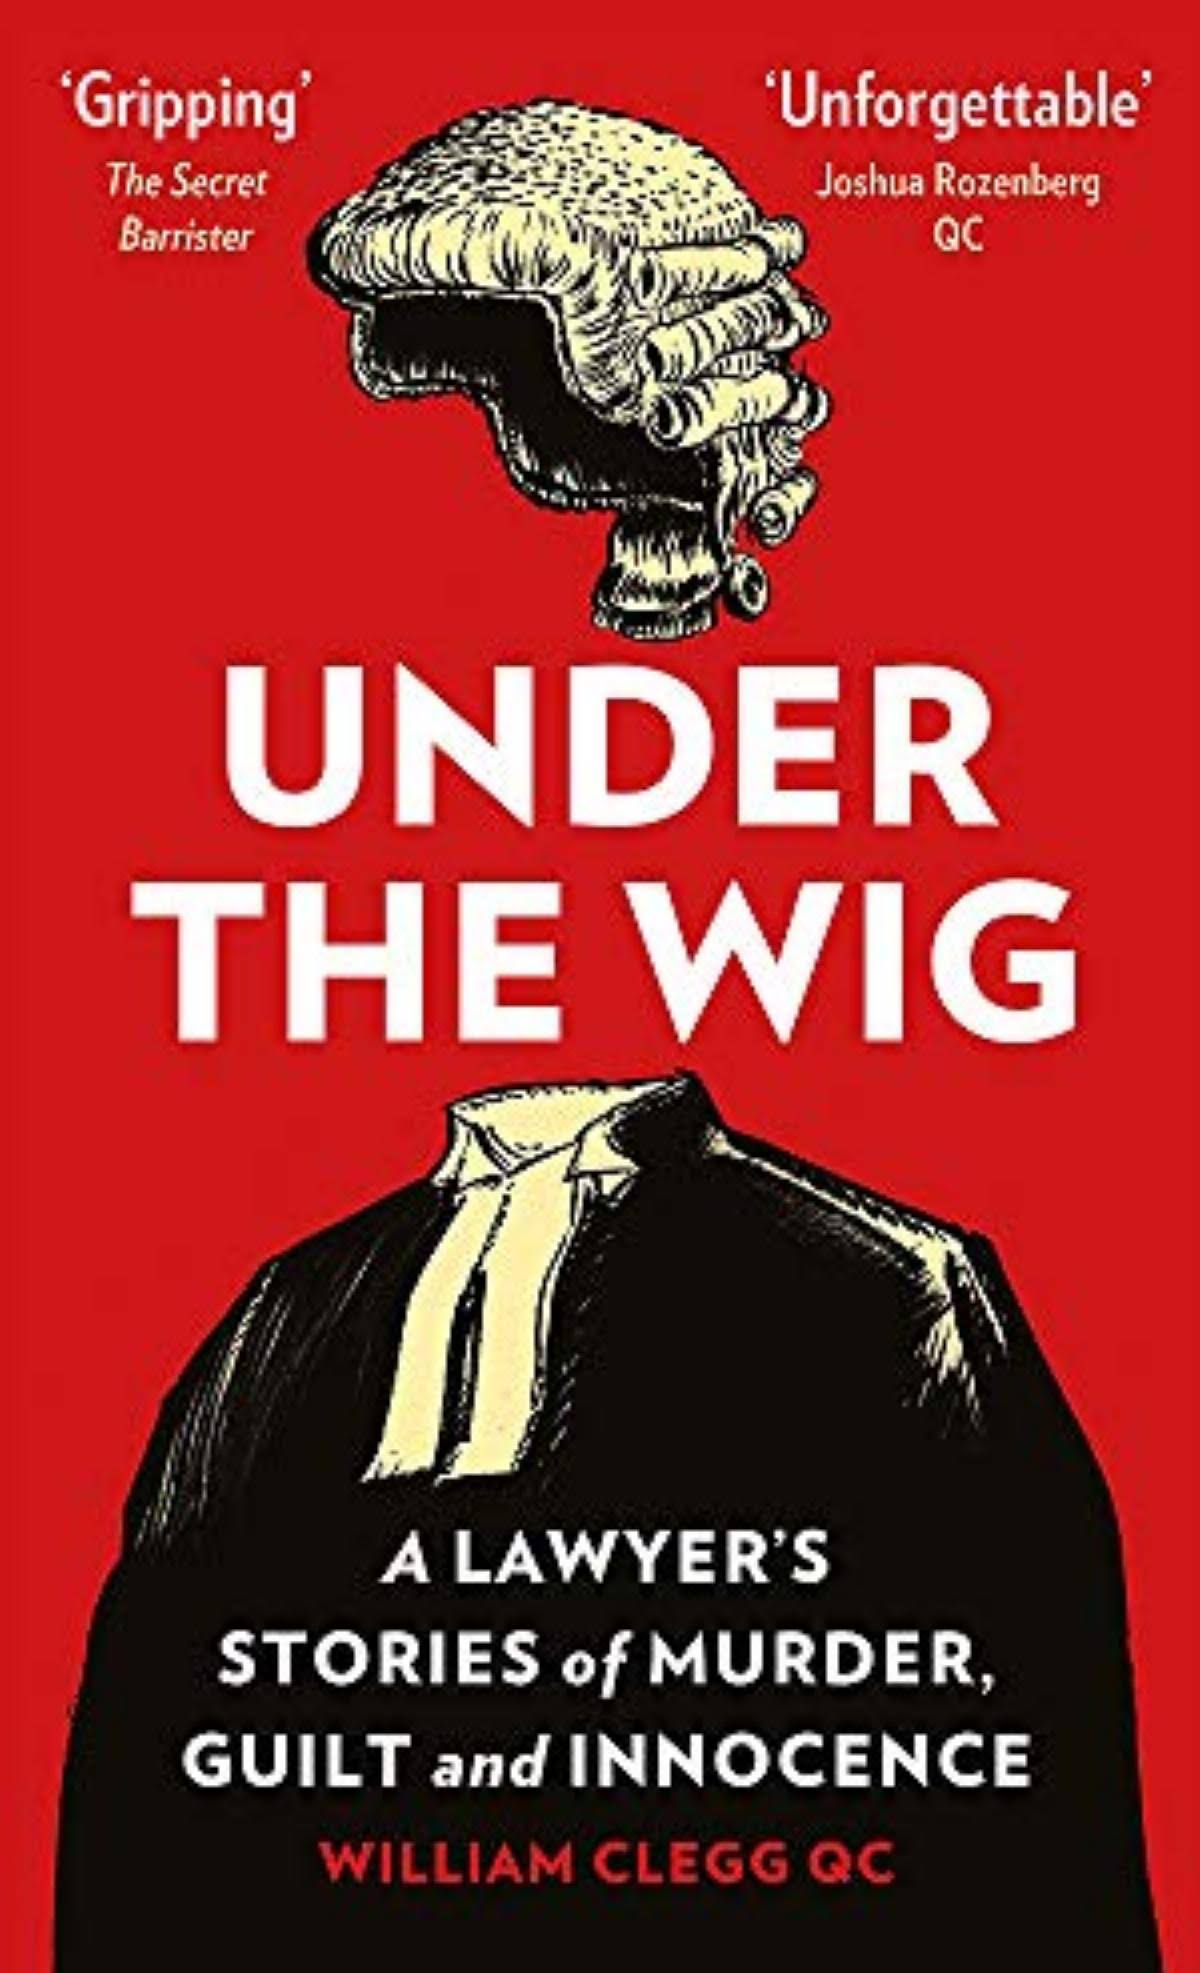 Under the Wig [Book]